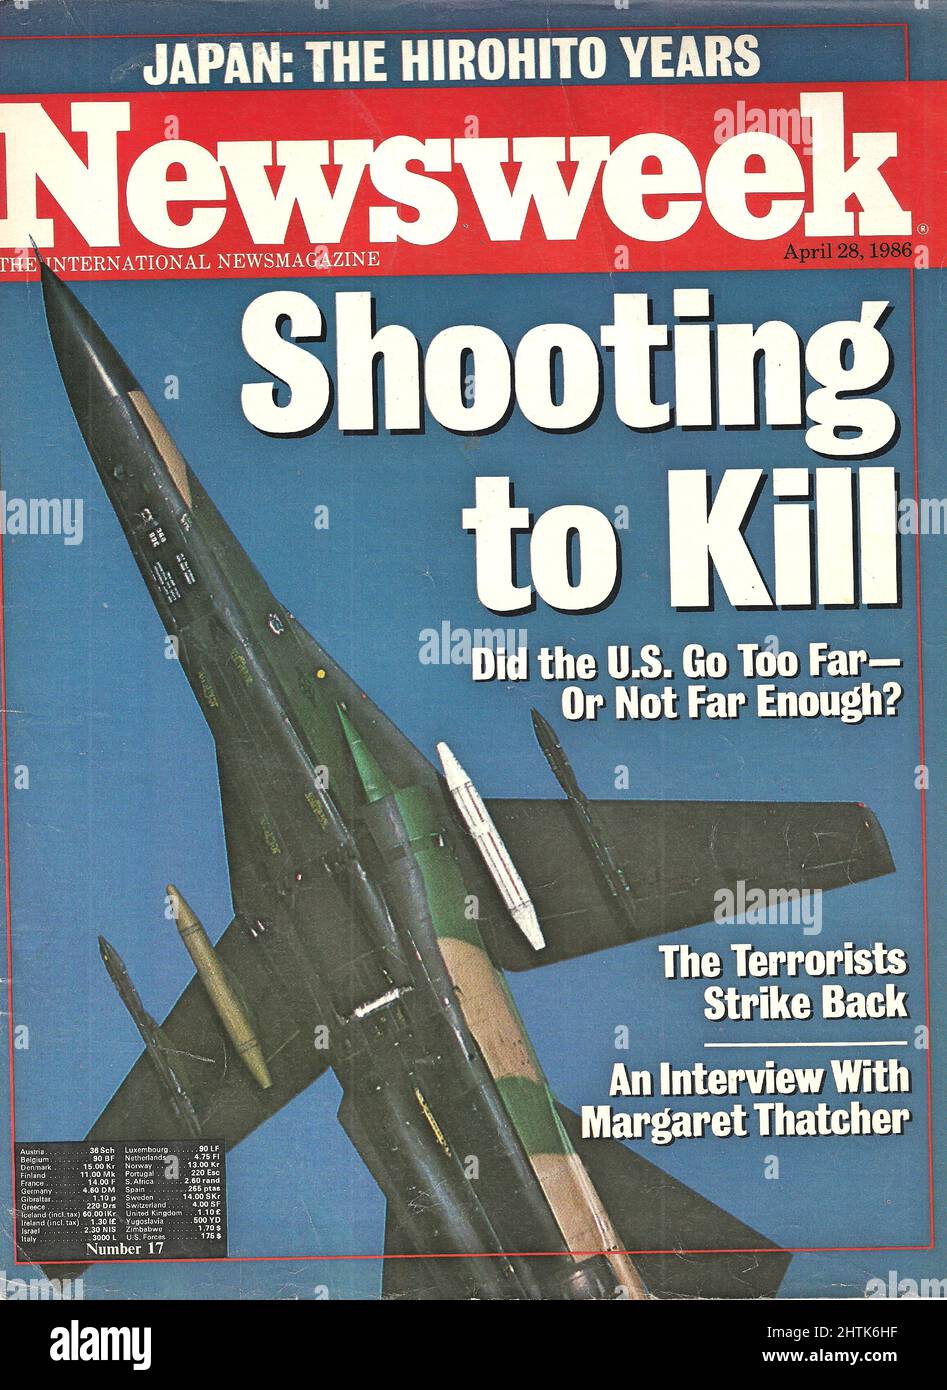 Newsweek cover April 28 1986 An interview with Margaret Thatcher Japan The Hirohito years Stock Photo